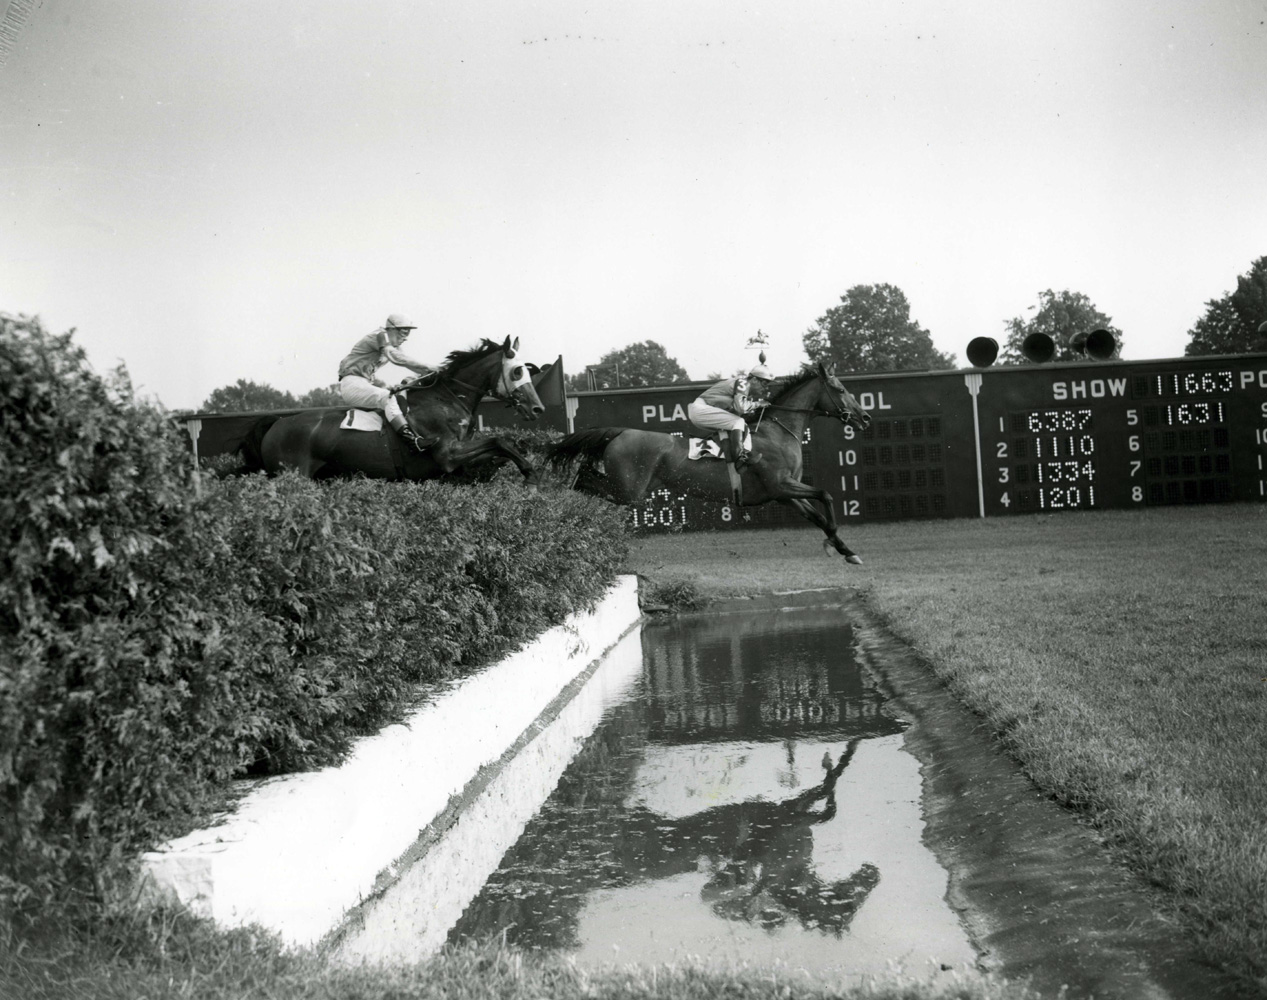 Frank Dooley Adams and Oedipus clearing a water obstacle in the 1950 Saratoga Steeplechase Handicap (Keeneland Library Morgan Collection/Museum Collection)